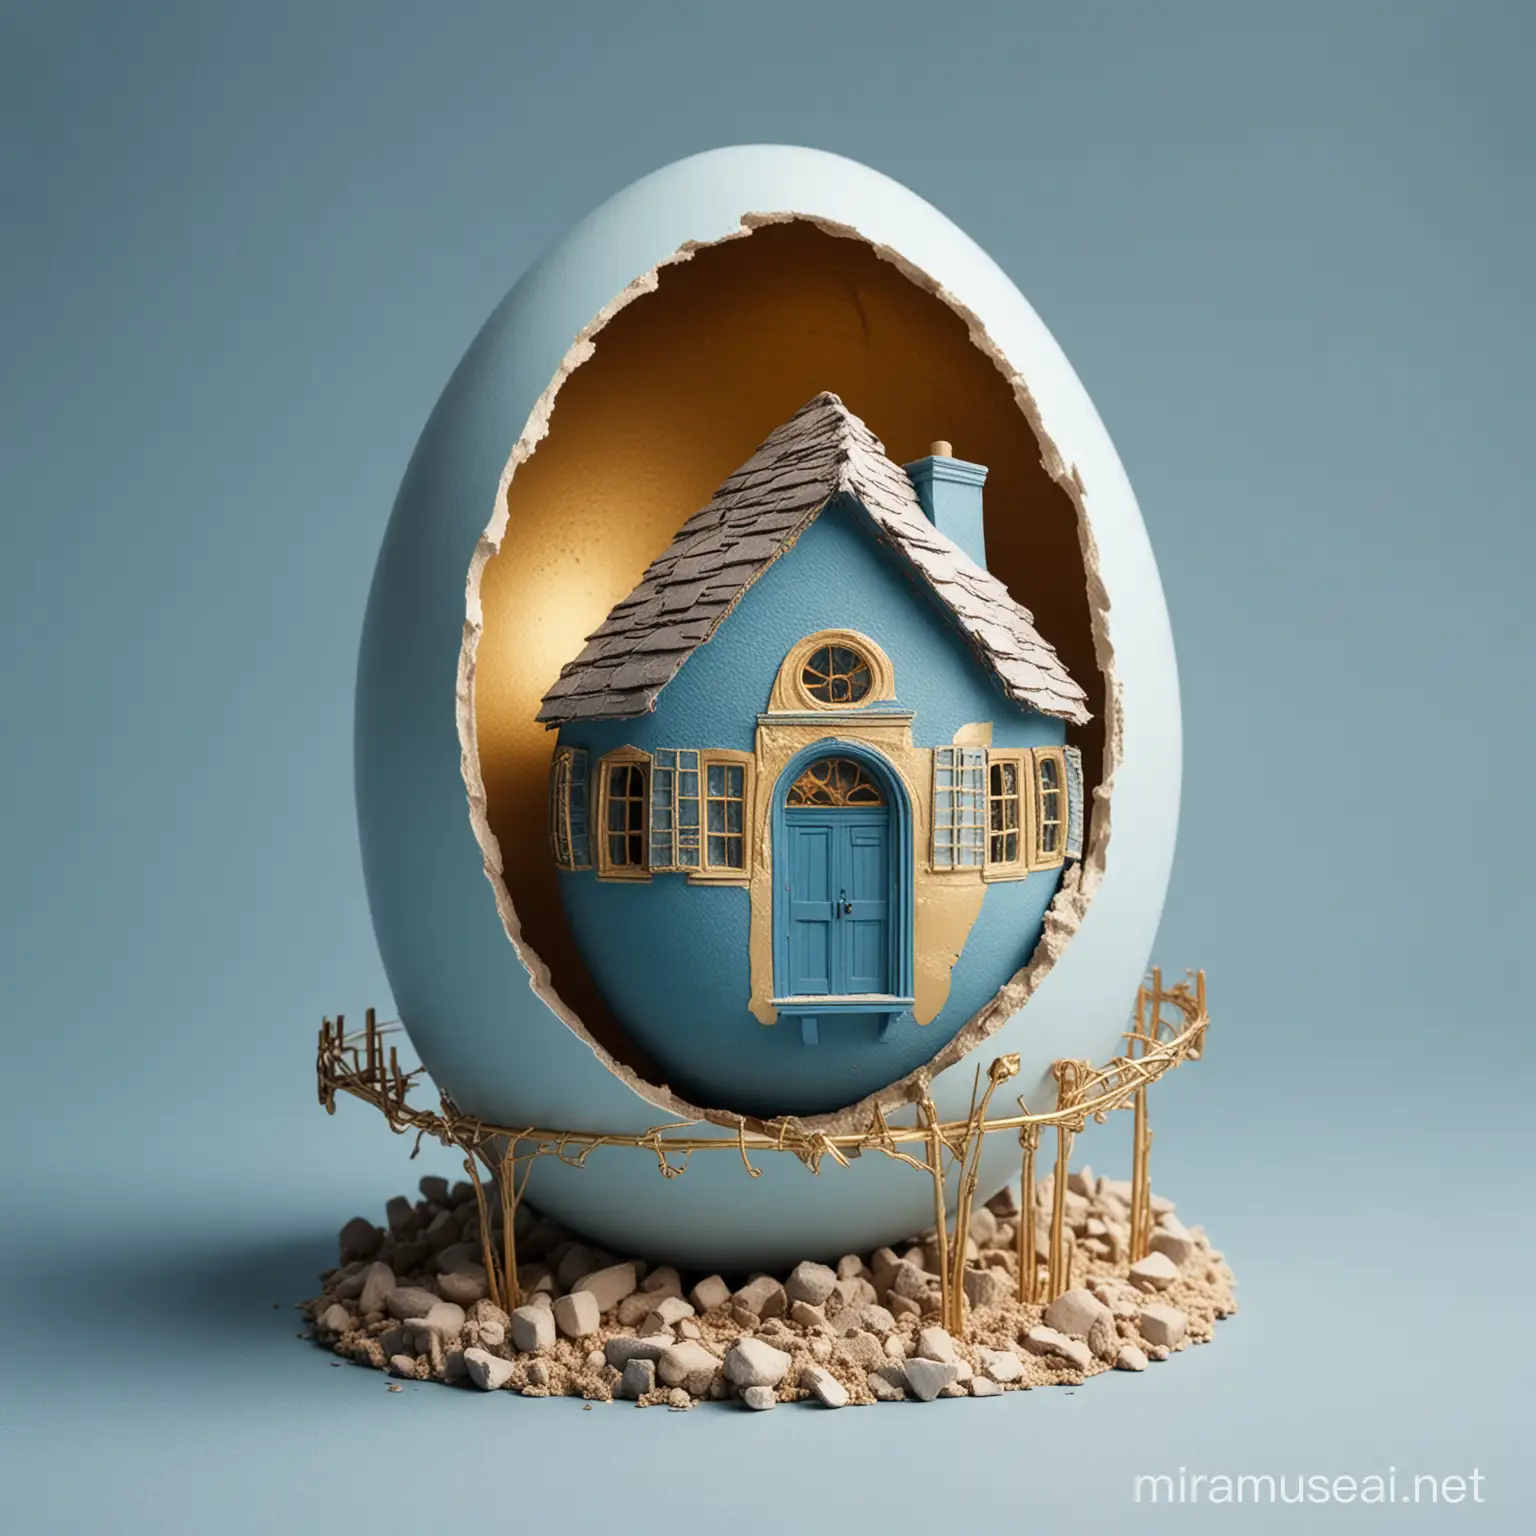 Mystical Blue and Gold Egg Hatching a Dreamy House